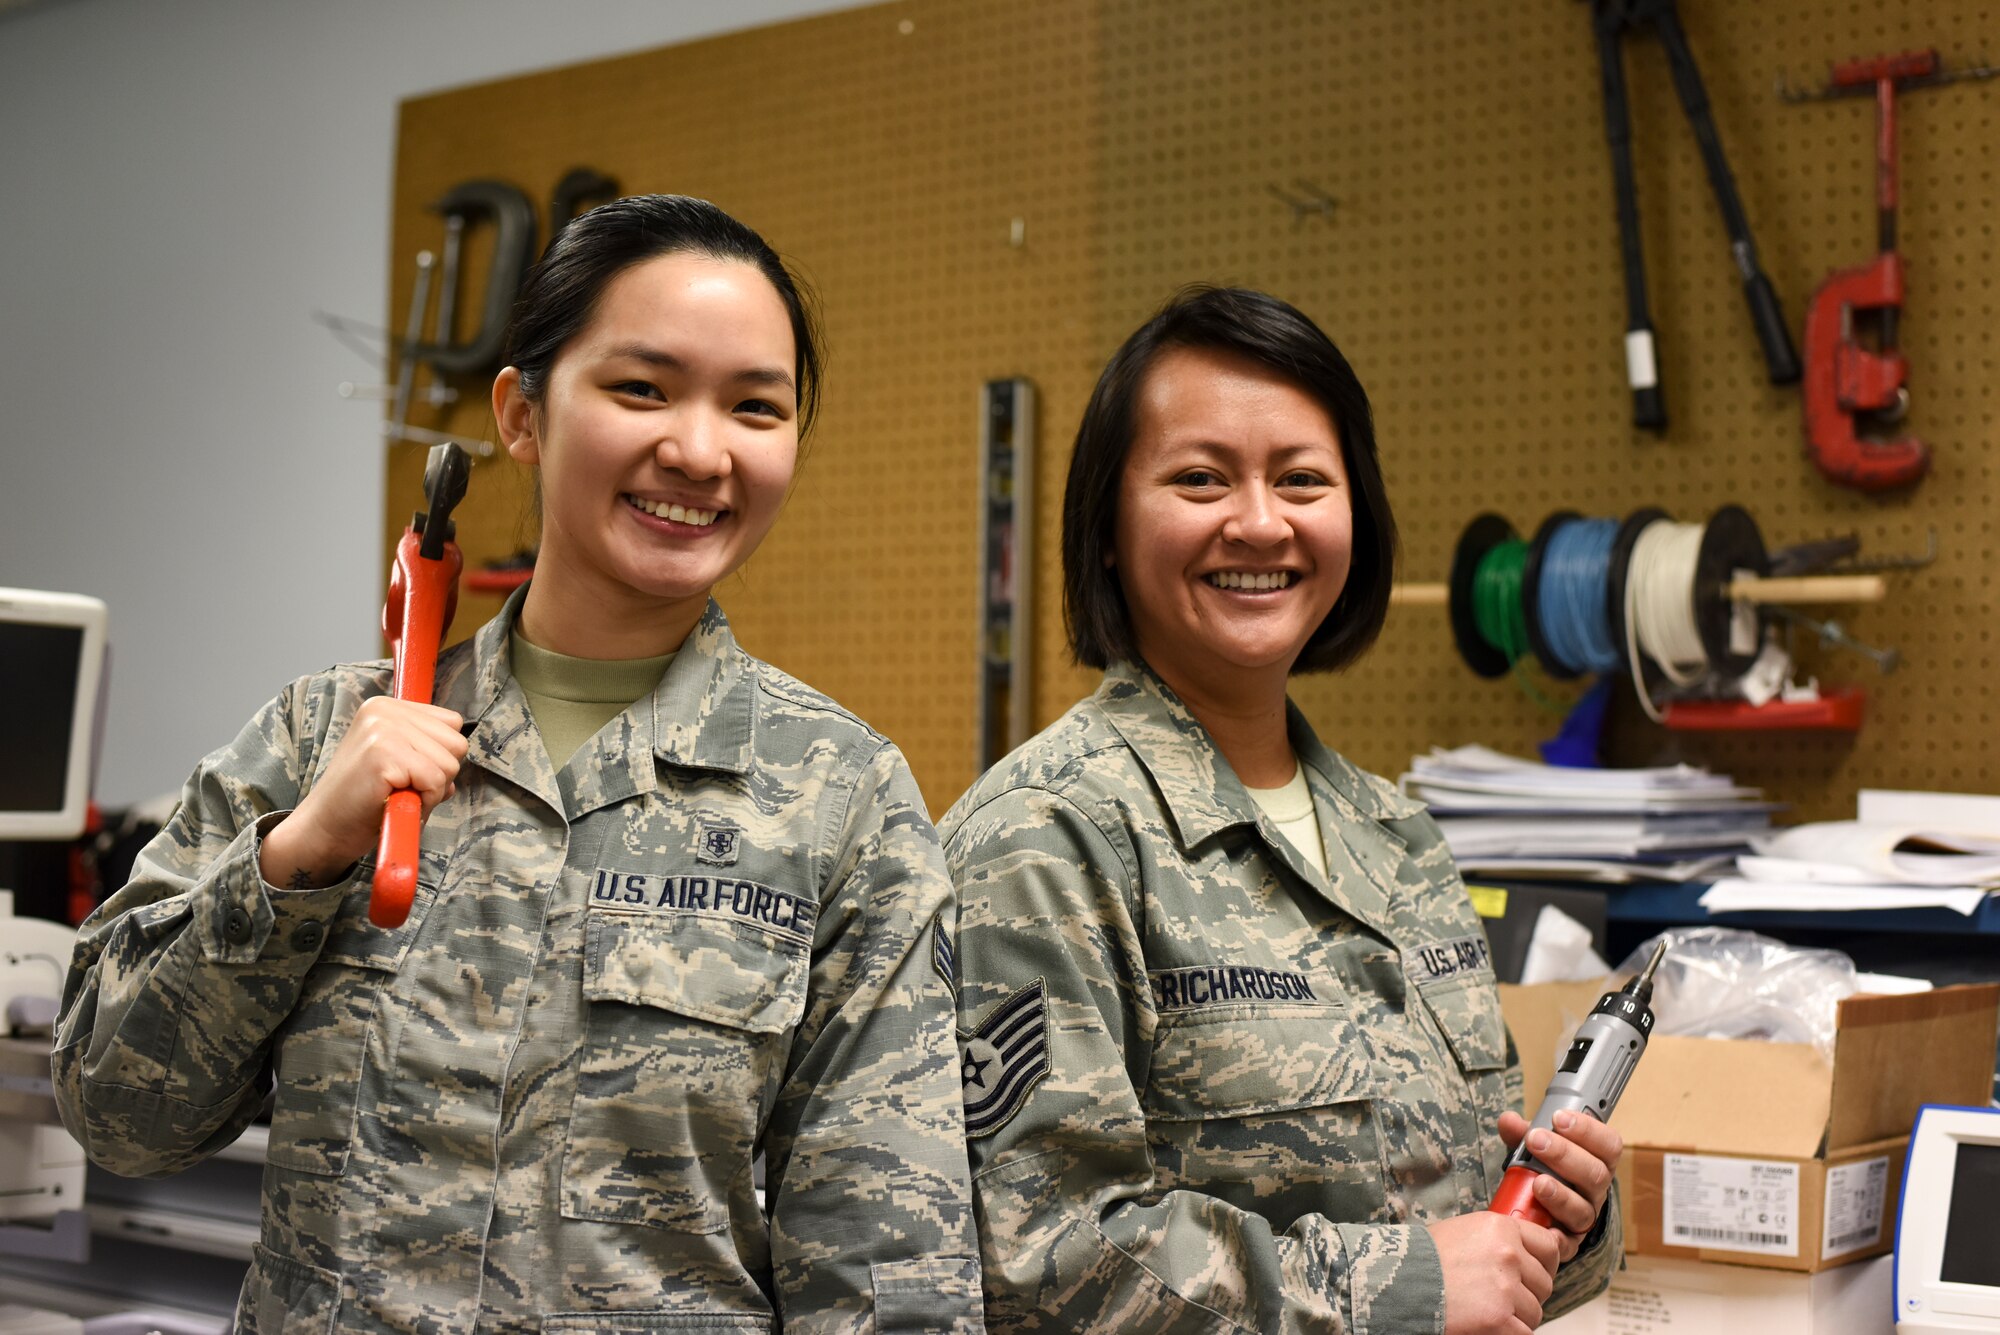 Tech. Sgt. Kristine Richardson, 39th Medical Support Squadron biomedical equipment NCO in charge, right, and Senior Airman Kirsten Lee, 39th MDSS biomedical equipment technician, left, pose for a photo April 18, 2019, at Incirlik Air Base, Turkey.